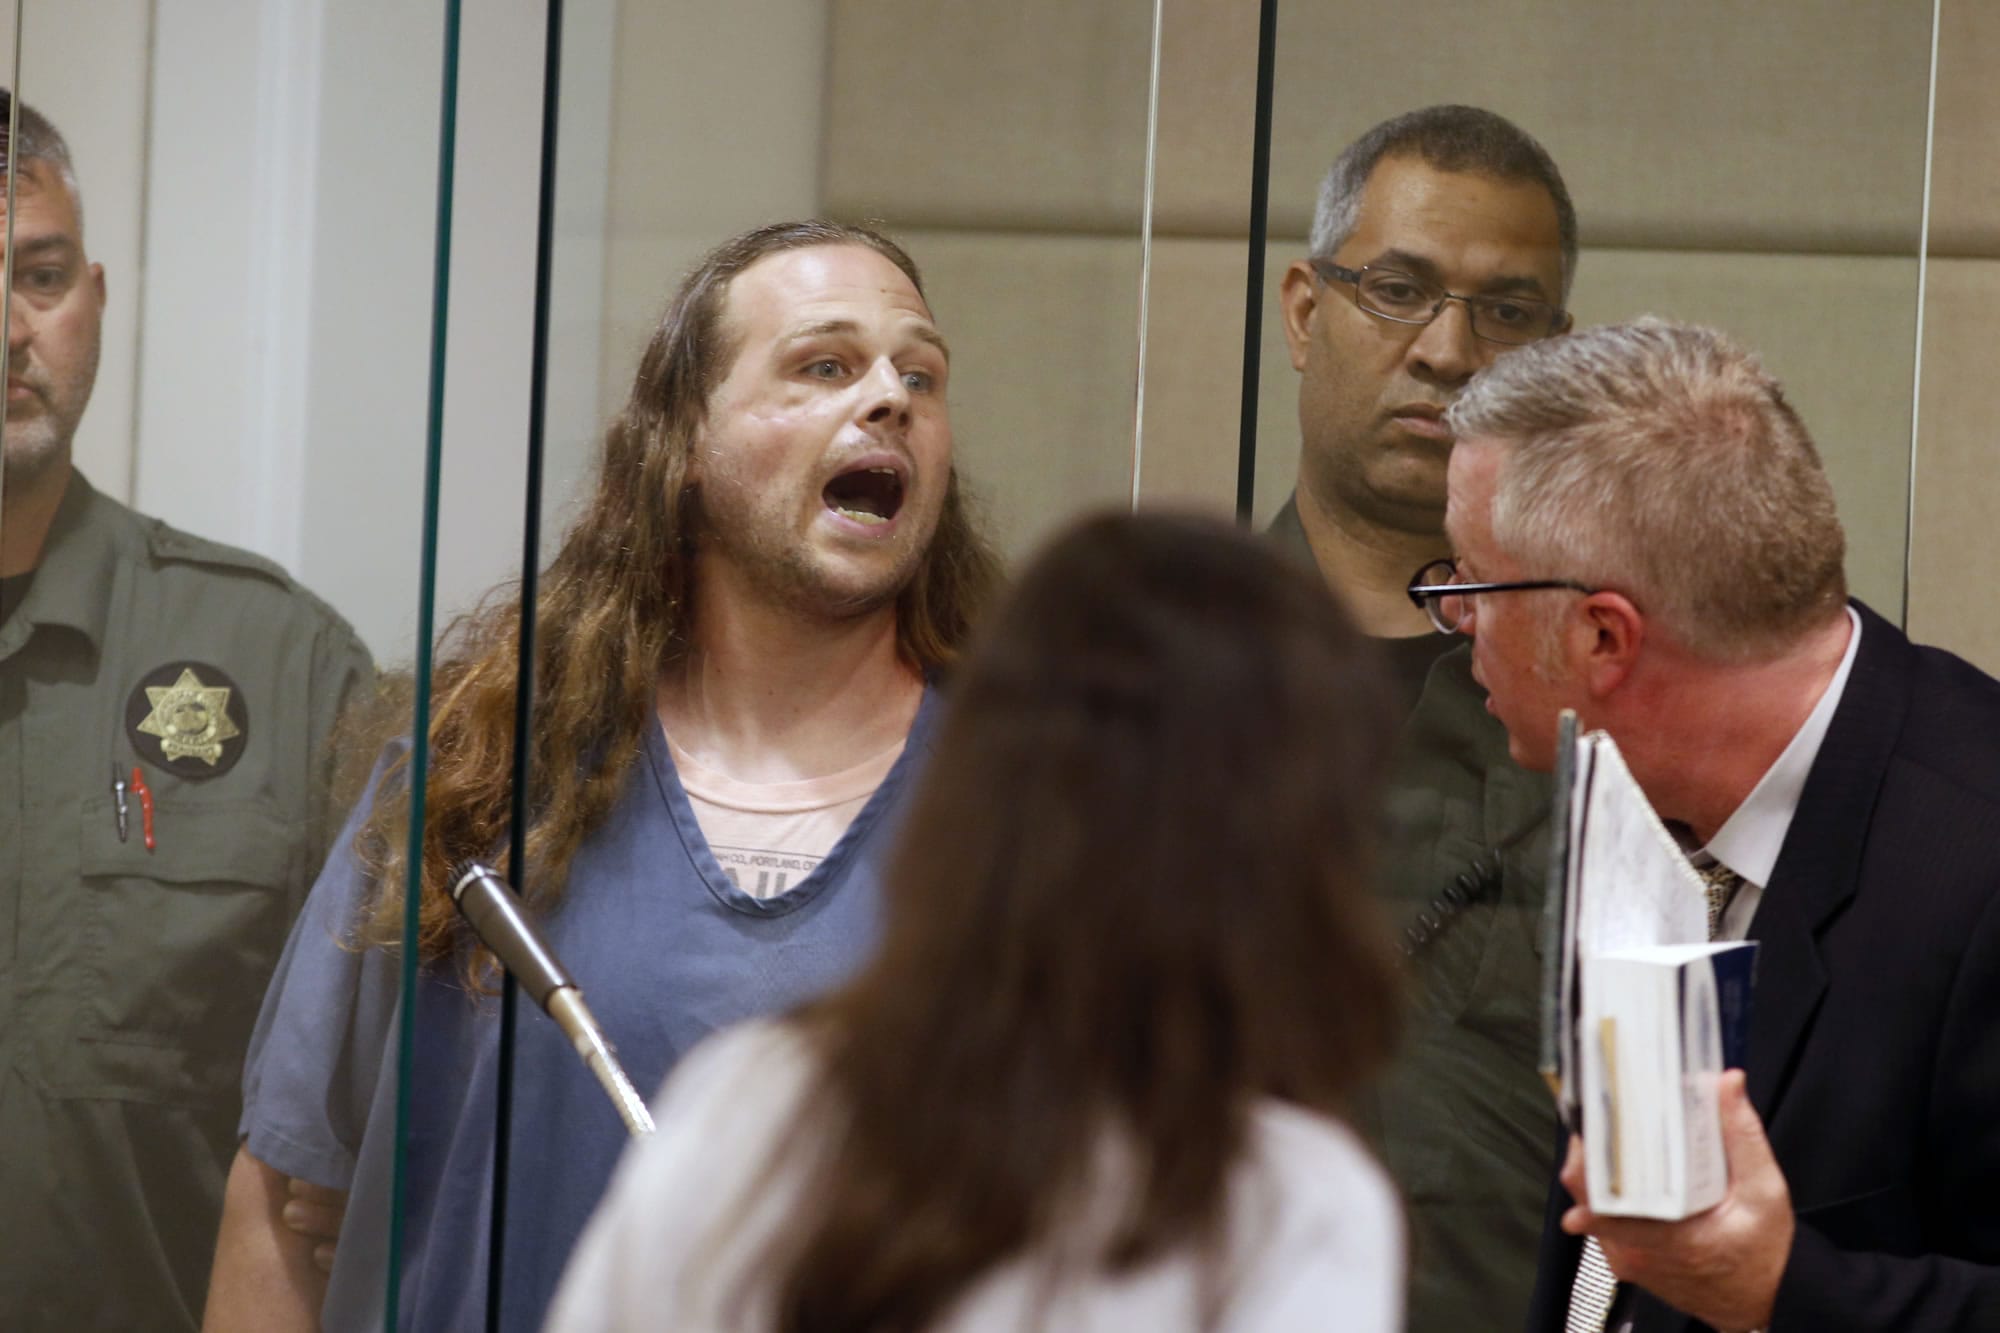 Jeremy Joseph Christian shouts as he is arraigned in Multnomah County Circuit Court in Portland, Ore., Tuesday, May 30, 2017. Authorities say Christian started verbally abusing two young women, including one wearing a hijab. When three men on the train intervened, police say, Christian attacked them, killing two and wounding one.